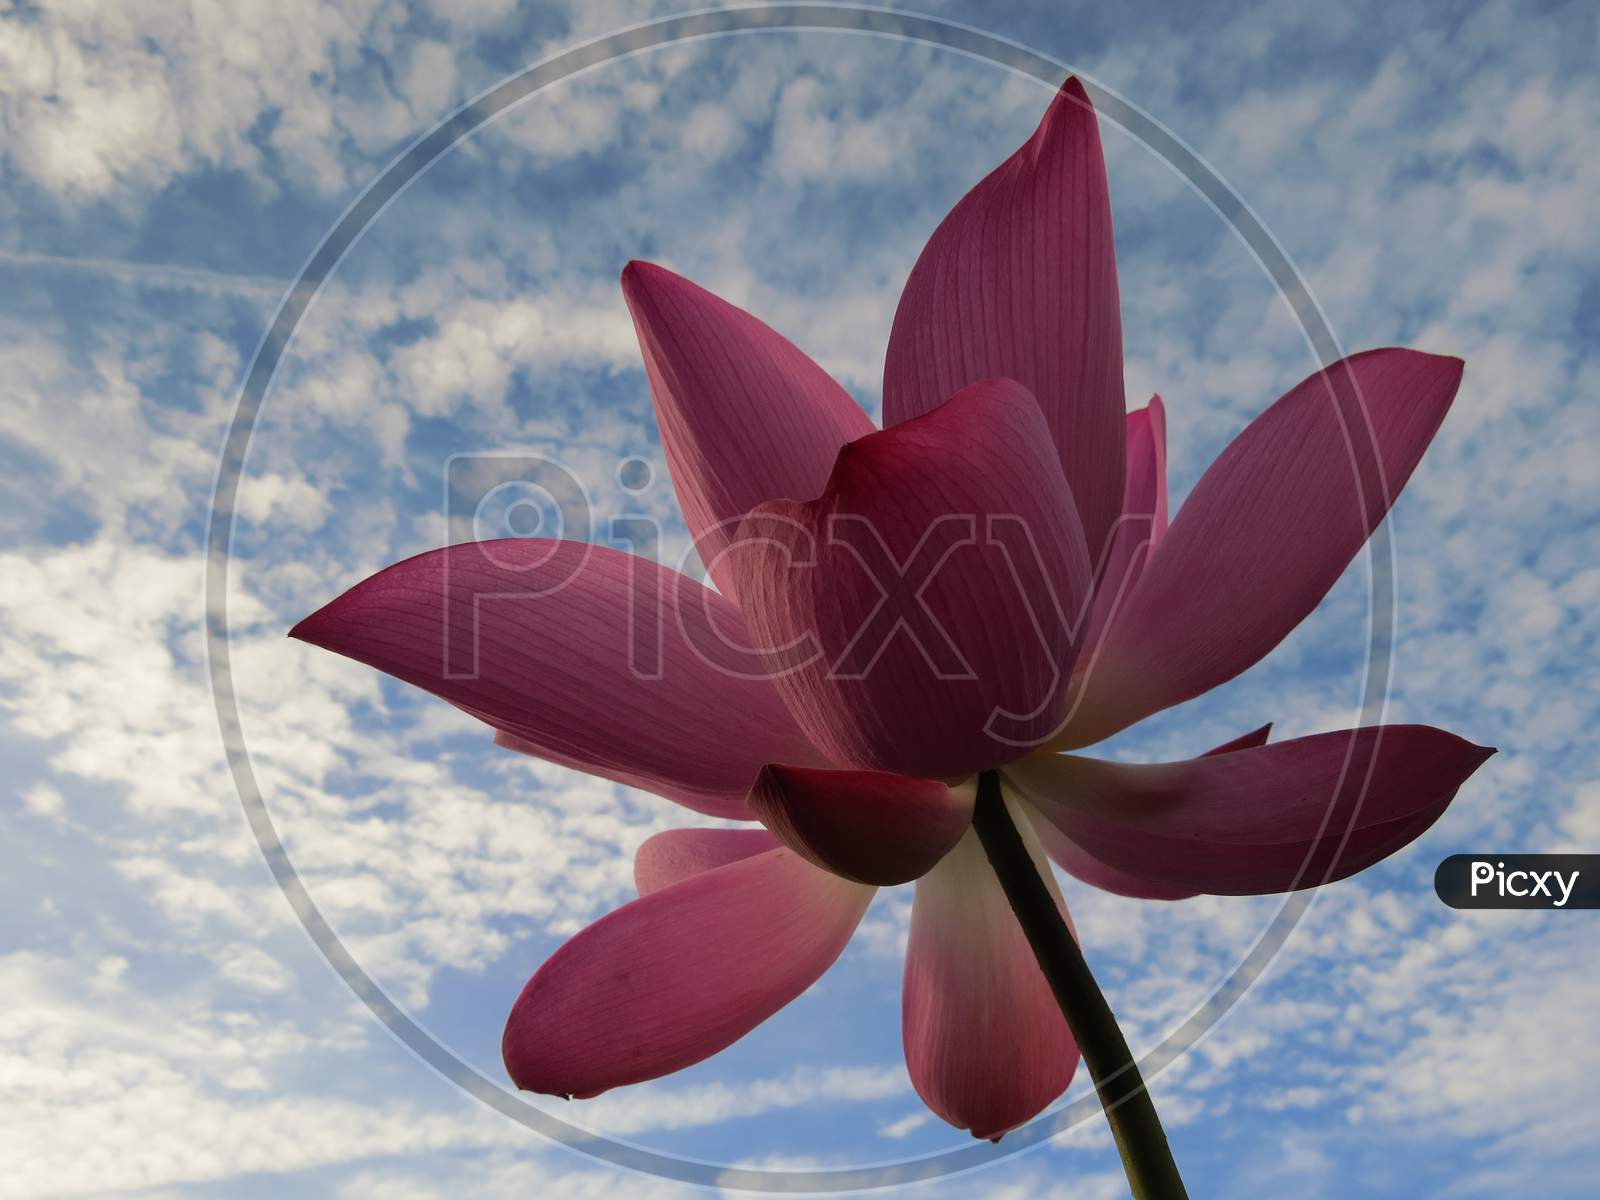 Lotus is an important religious symbol, beautiful, dignified and clean